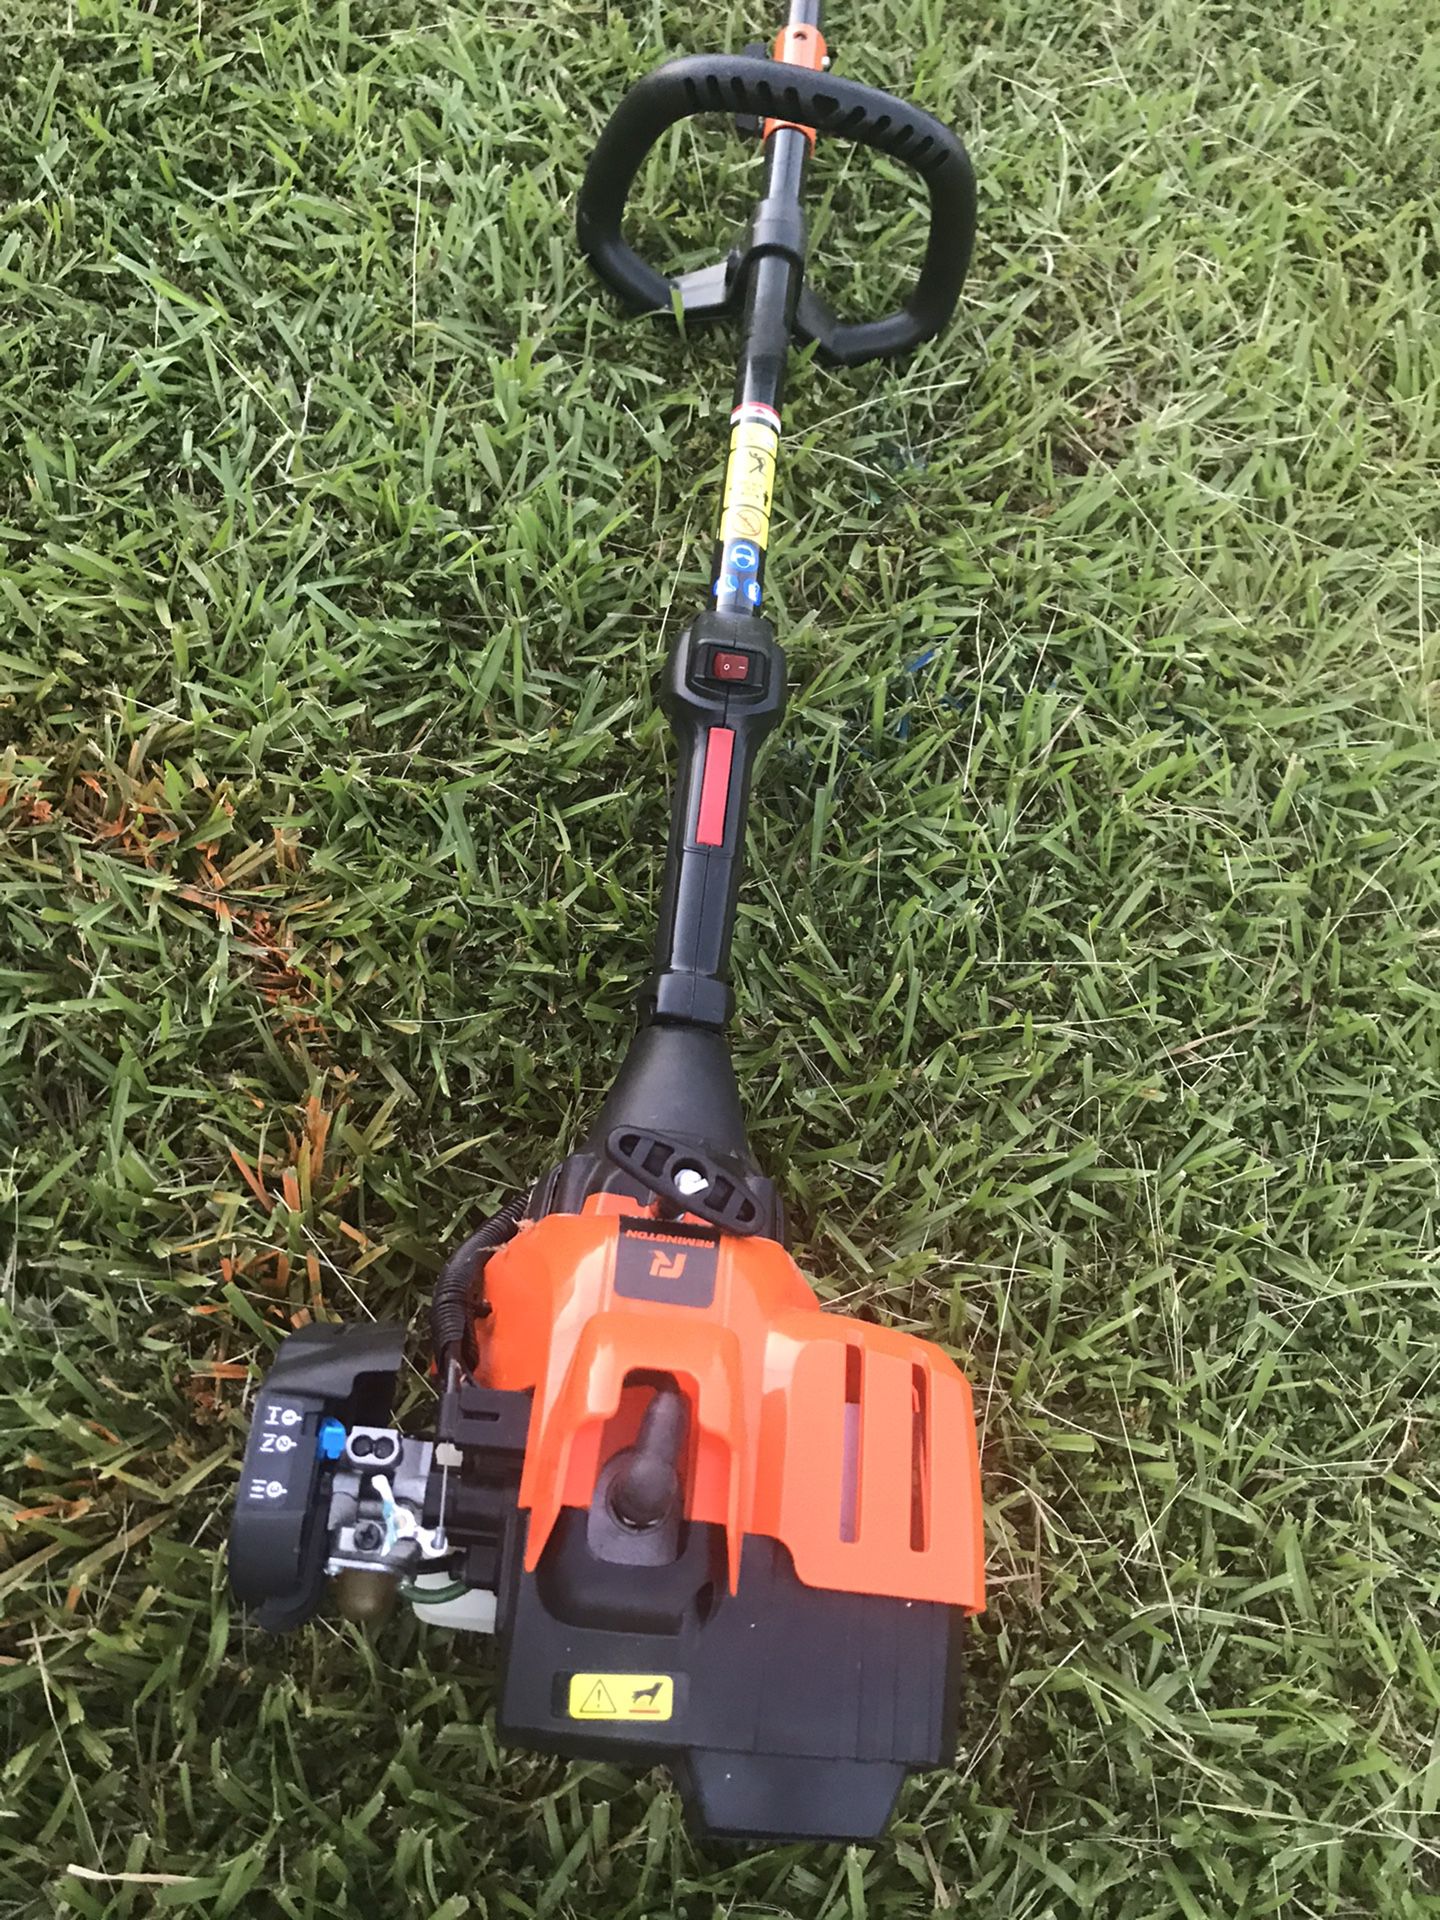 Remington weed eater chainsaw for Sale in Angier, NC - OfferUp